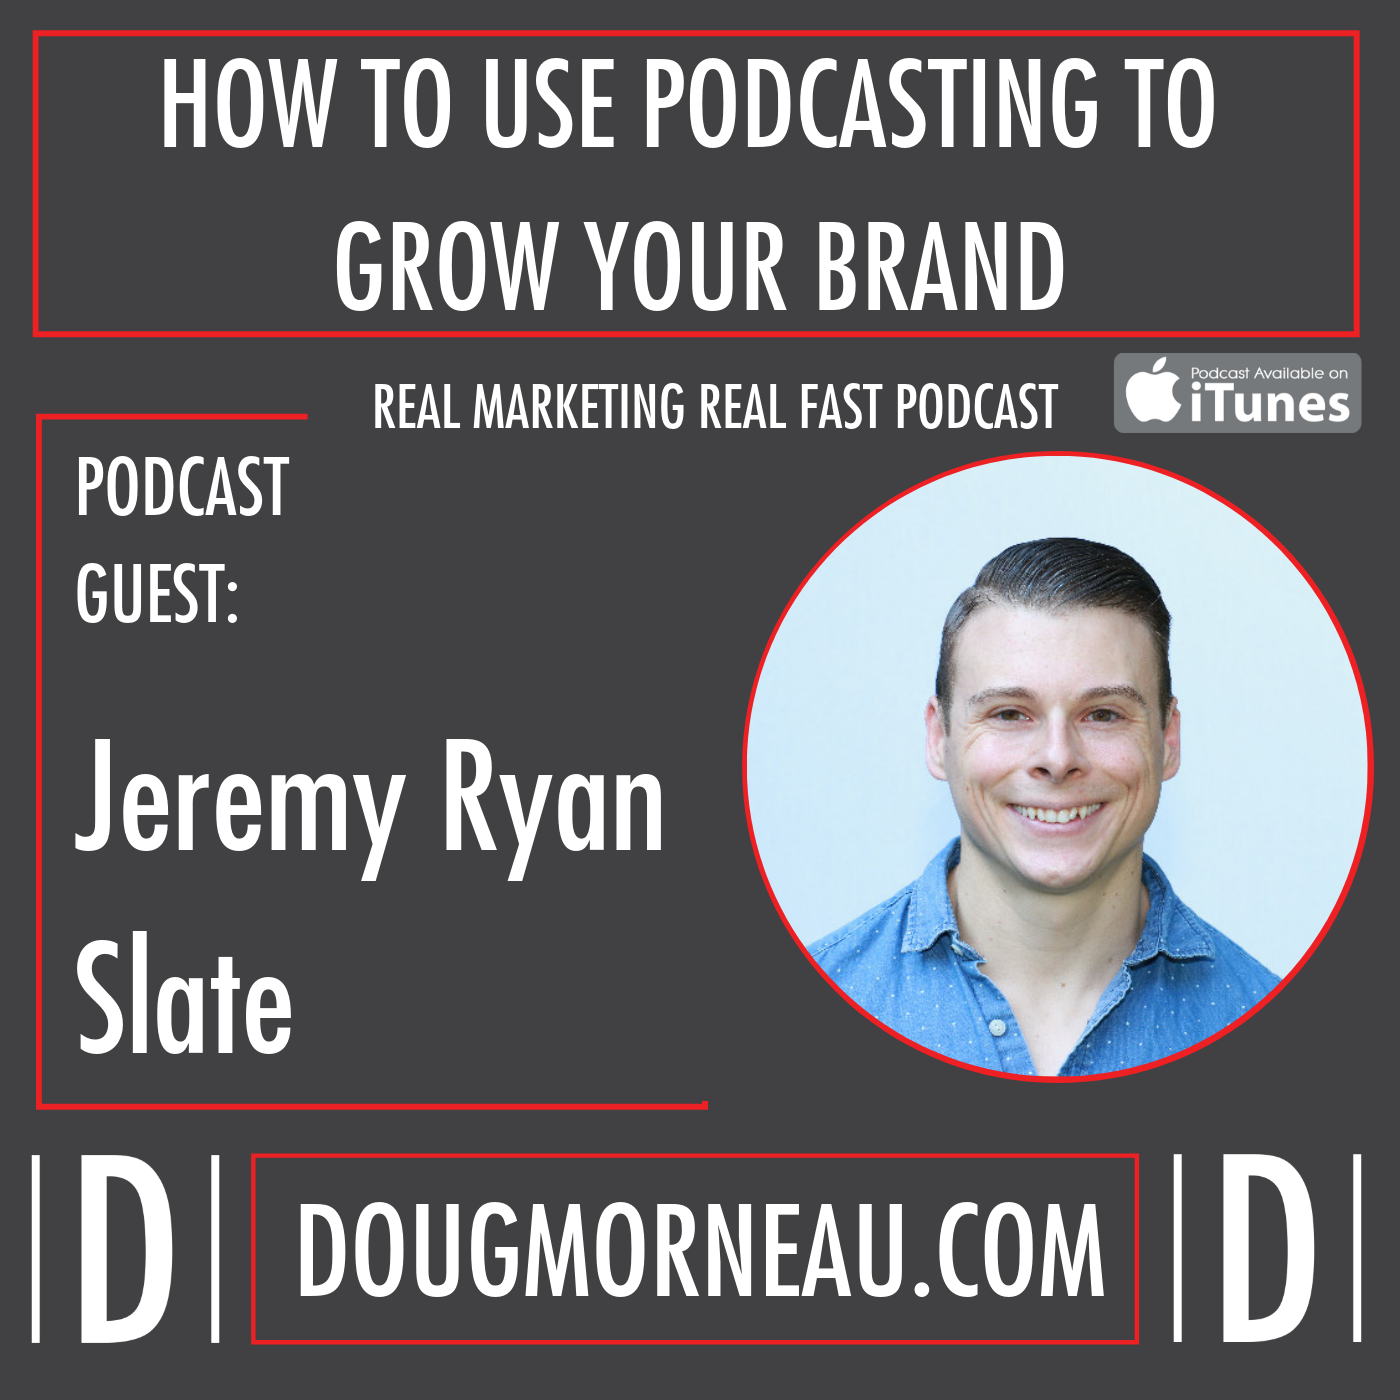 HOW TO USE PODCASTING TO GROW YOUR BRAND - JEREMY SLATE - DOUG MORNEAU - REAL MARKETING REAL FAST PODCAST